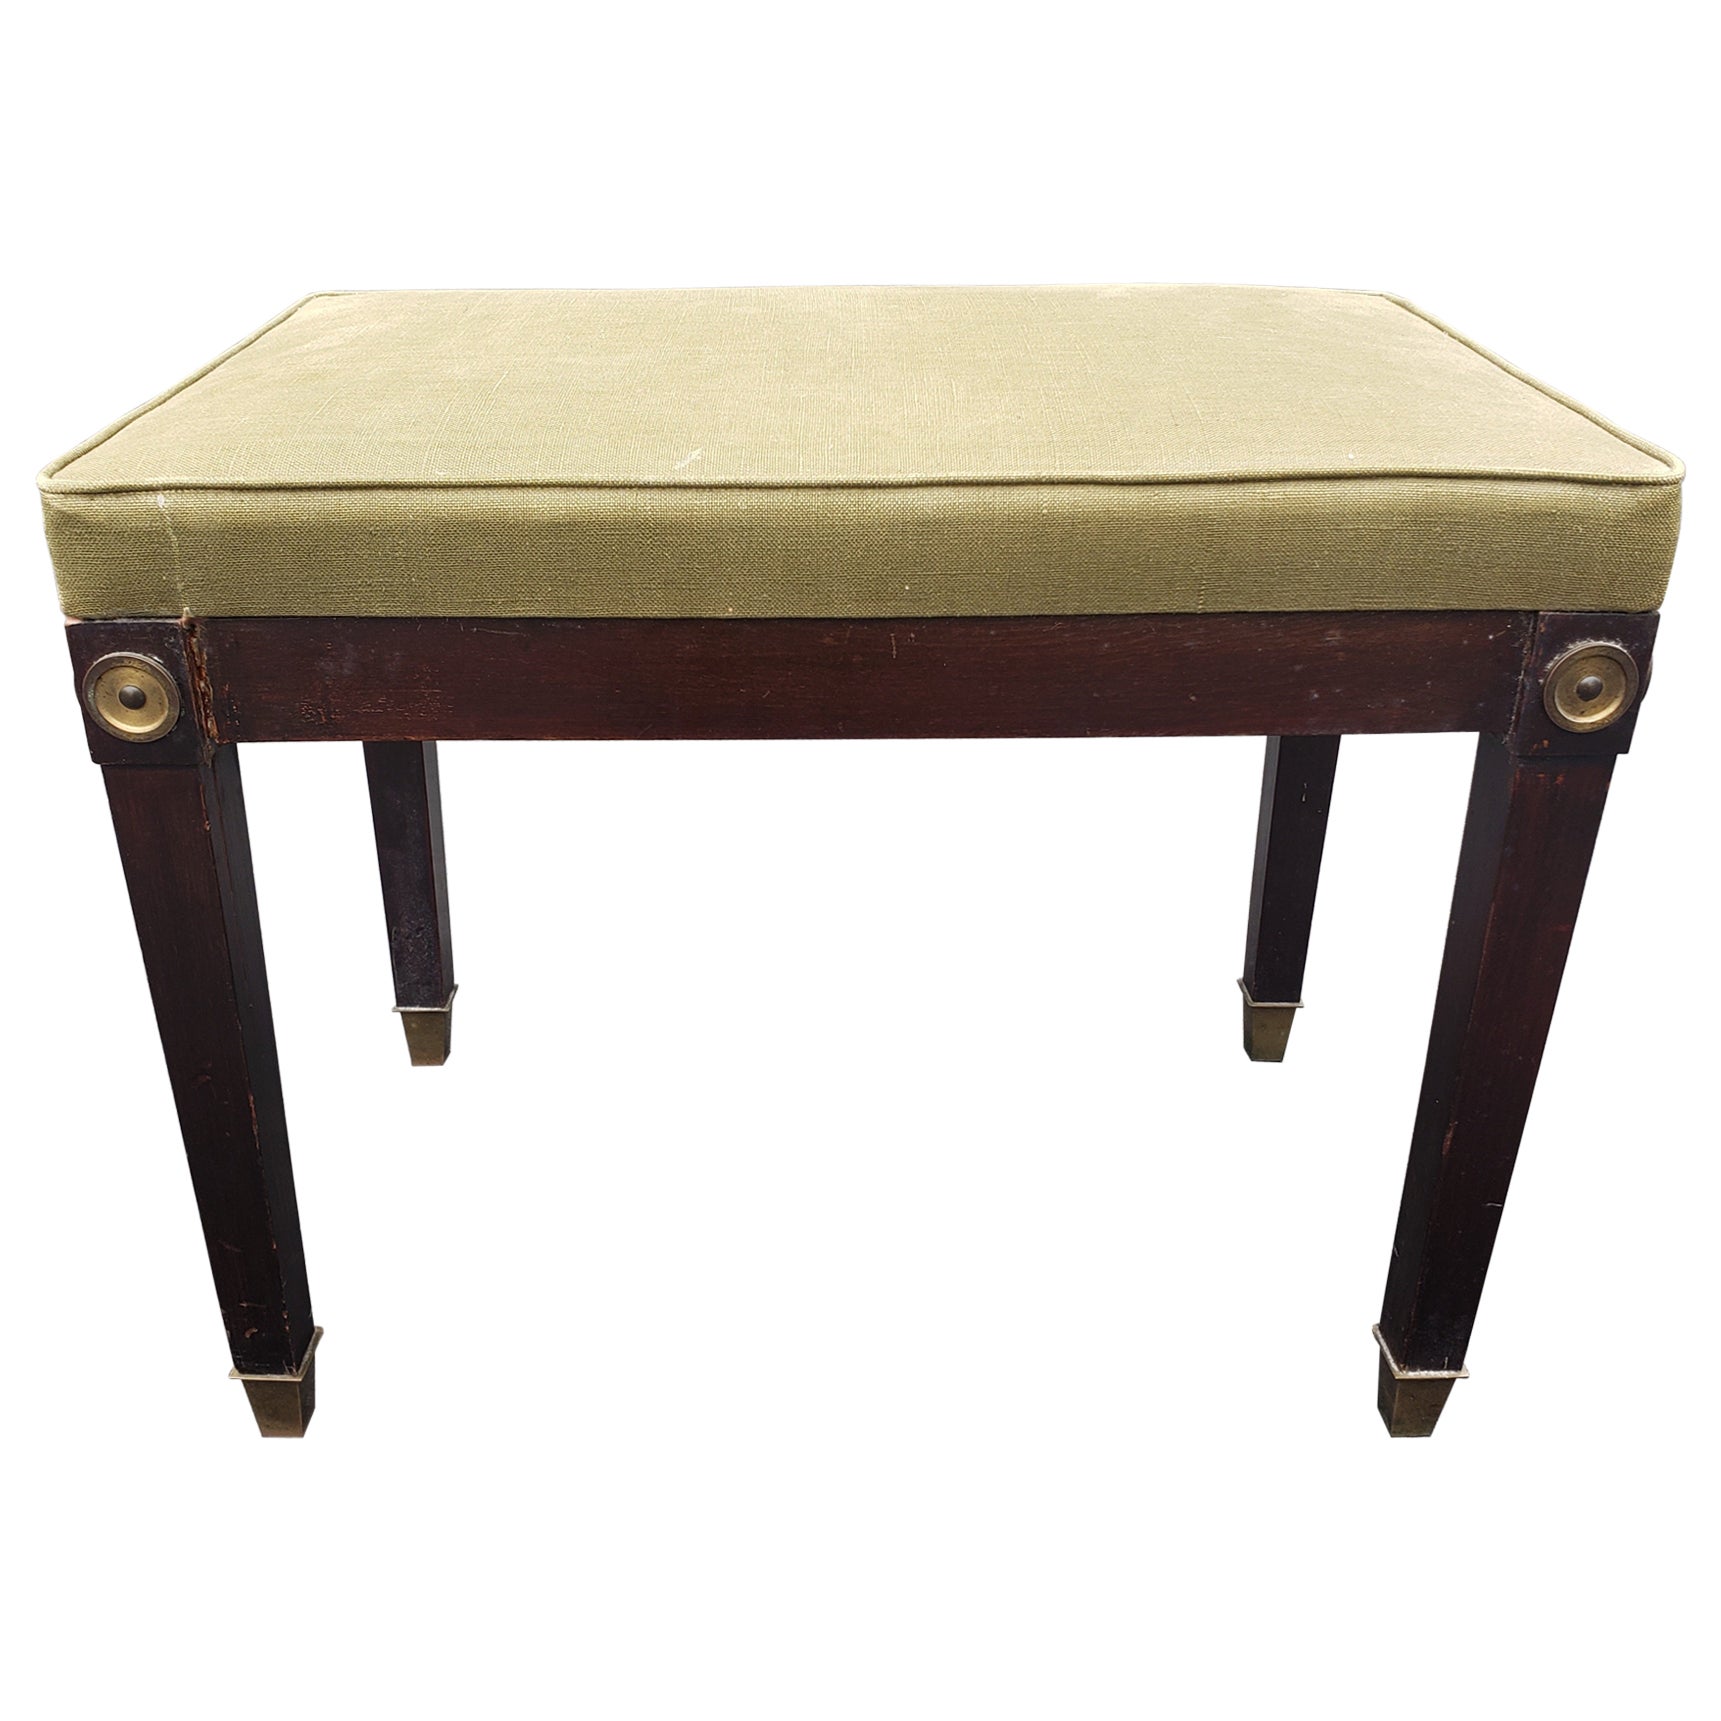 An elegant 1940s Mahogany and Upholstered Bench with Brass Capped Legs and Medallions. Dark green upholstery with minor fading. Brass capped legs.